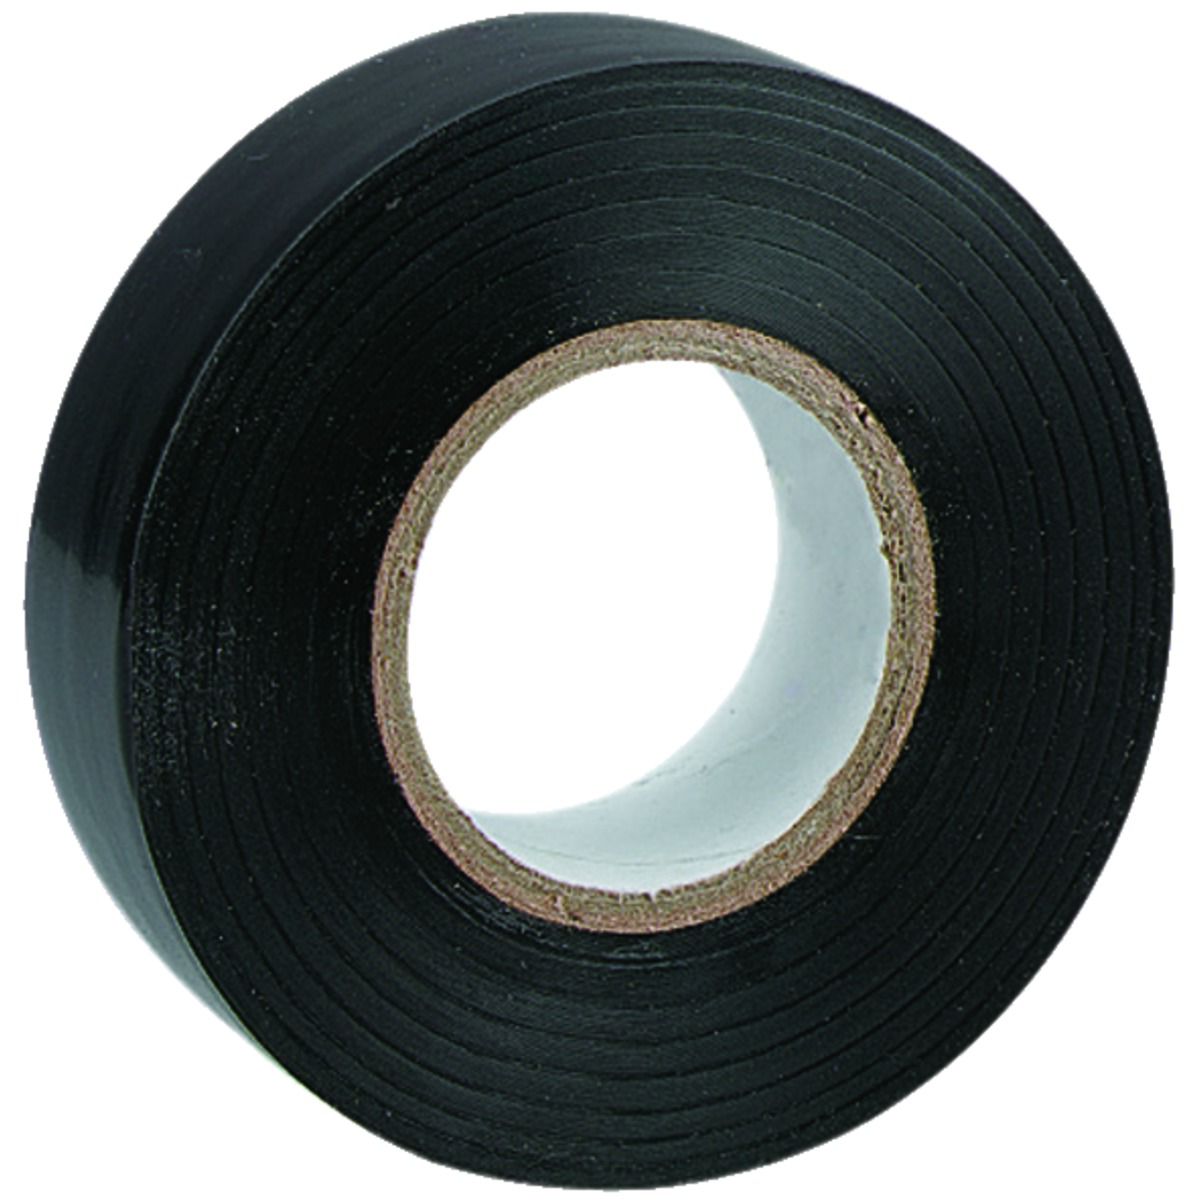 Image of Deta Black PVC Electrical Insulation Tape - 20m x 19mm - Pack of 10